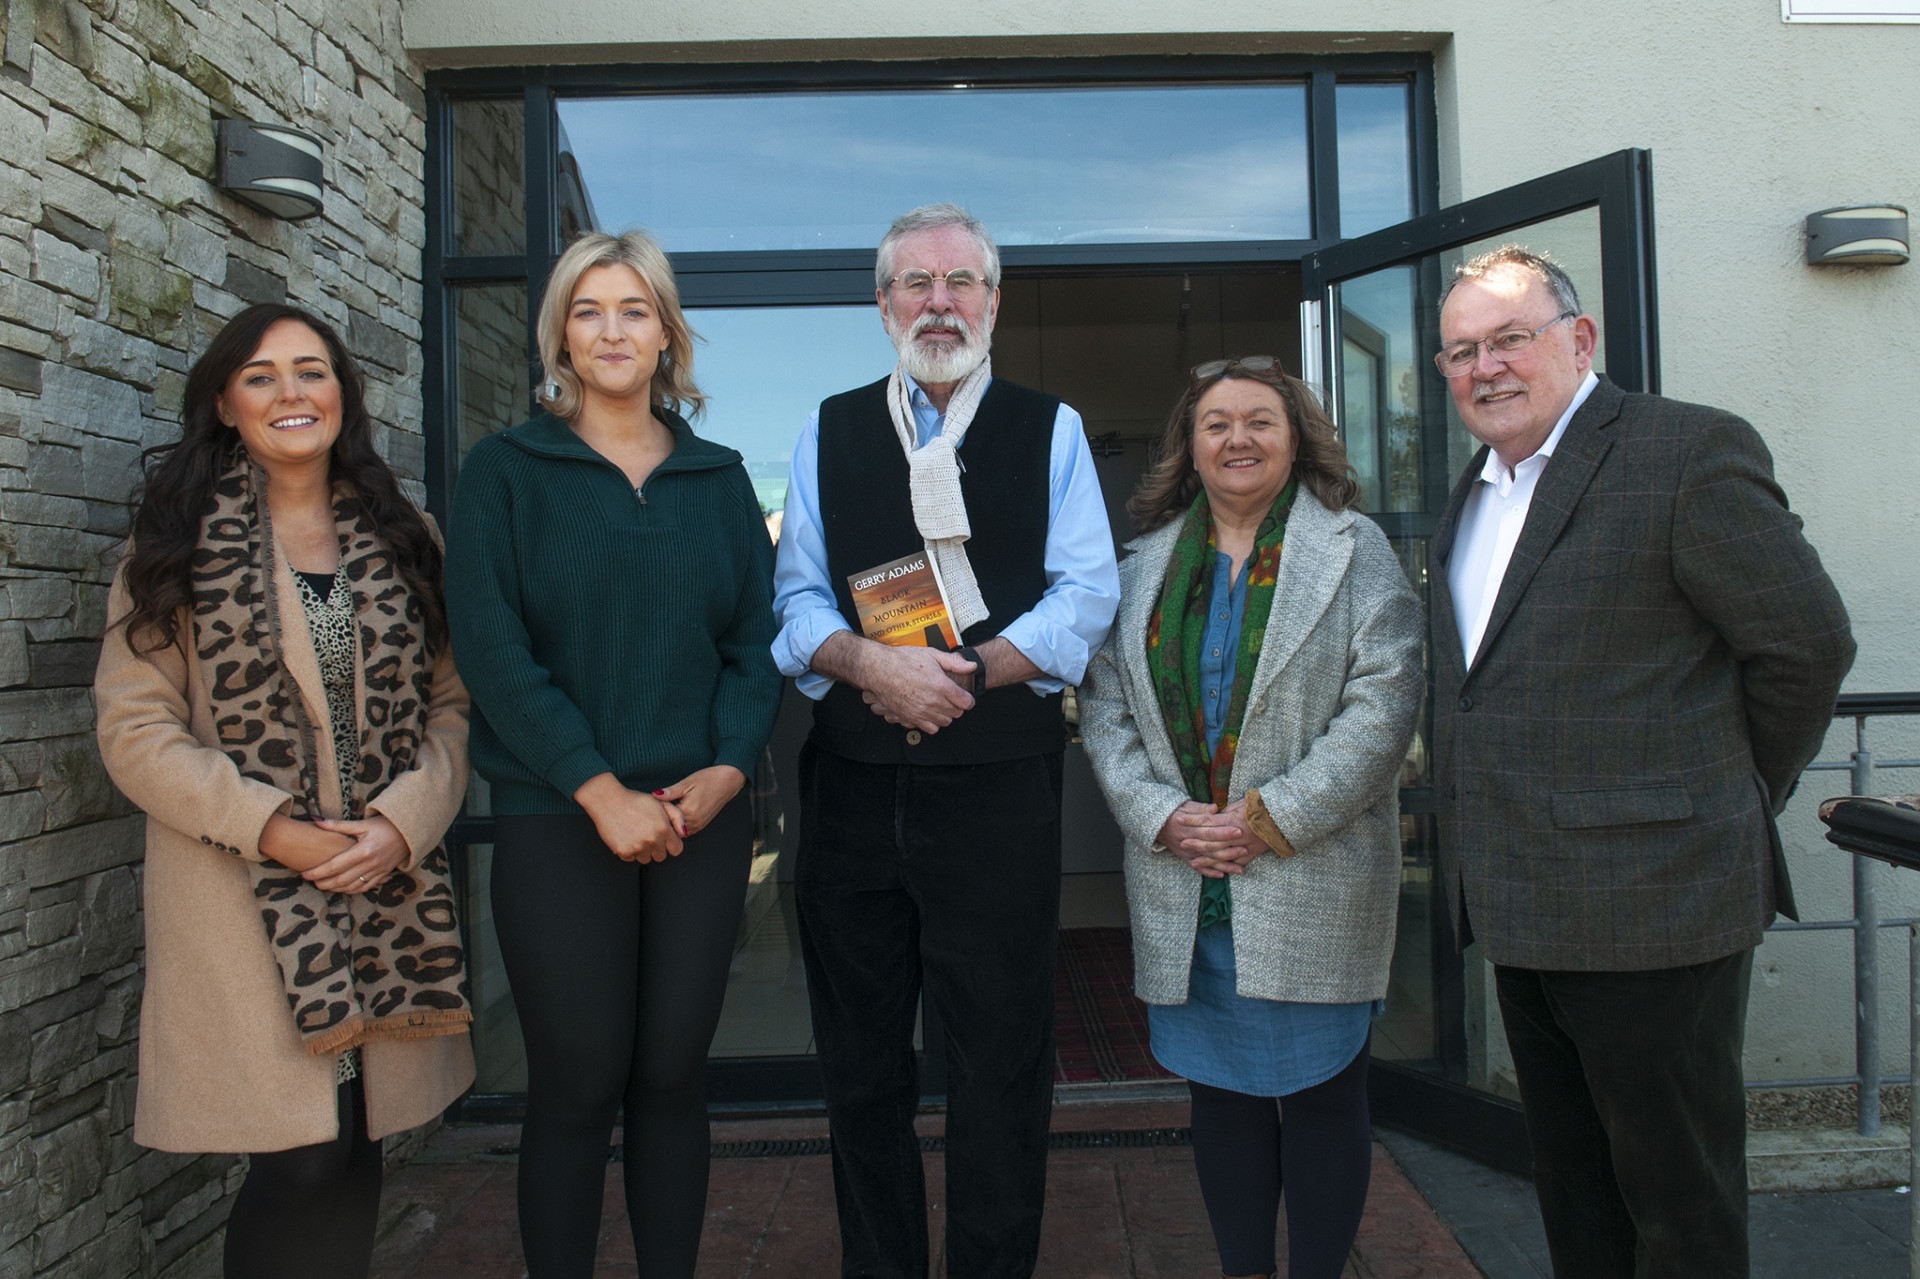 Crowds welcome Gerry Adams for book signing